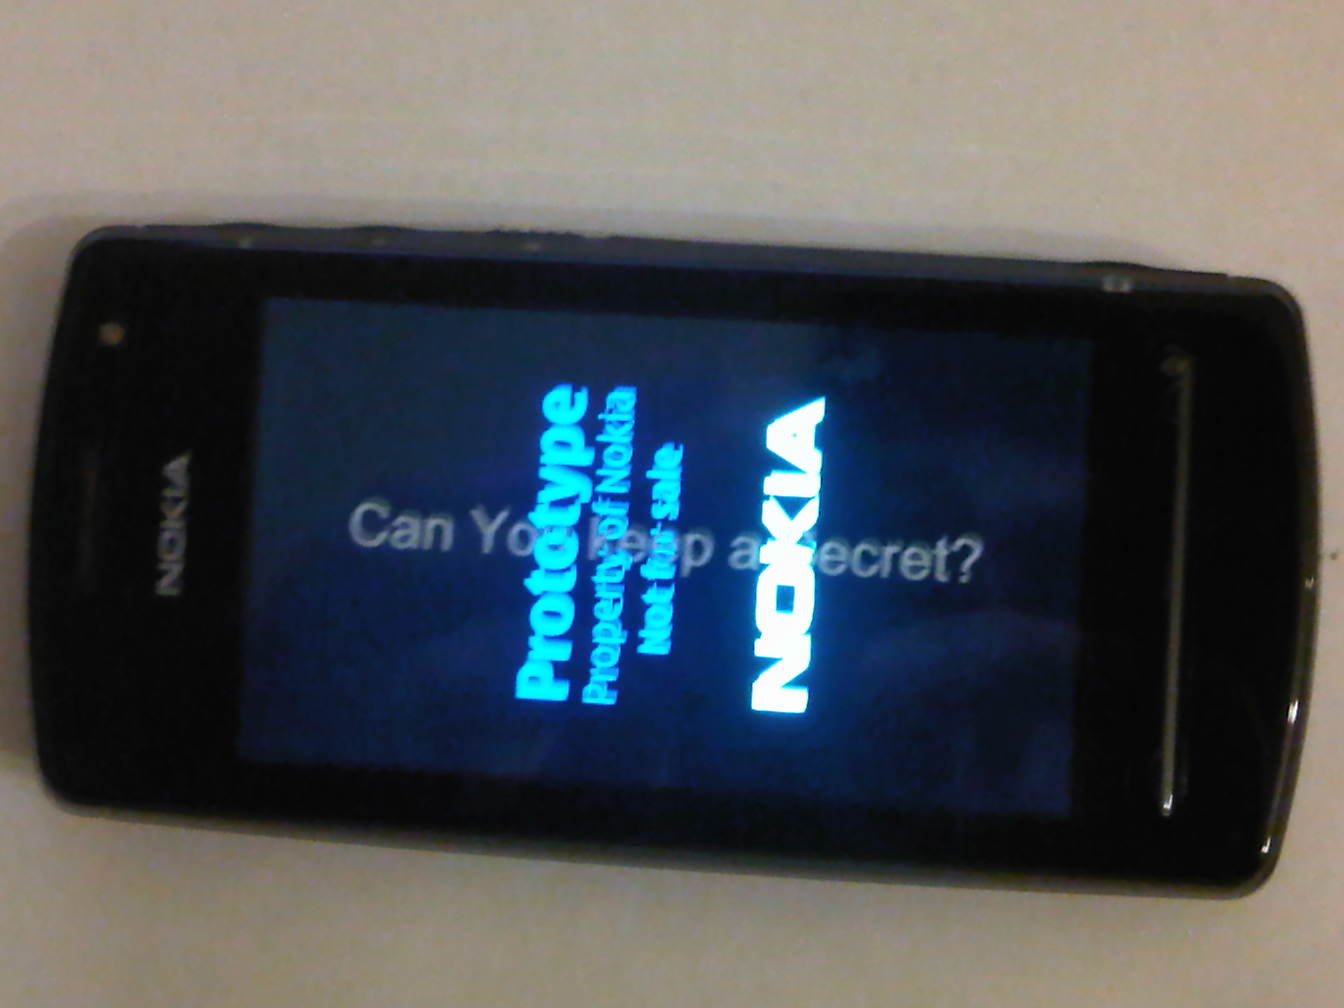 http://i1-news.softpedia-static.com/images/news2/Nokia-N5-with-Symbian-Anna-Spotted-N6-and-N7-Soon-to-Follow-3.jpg